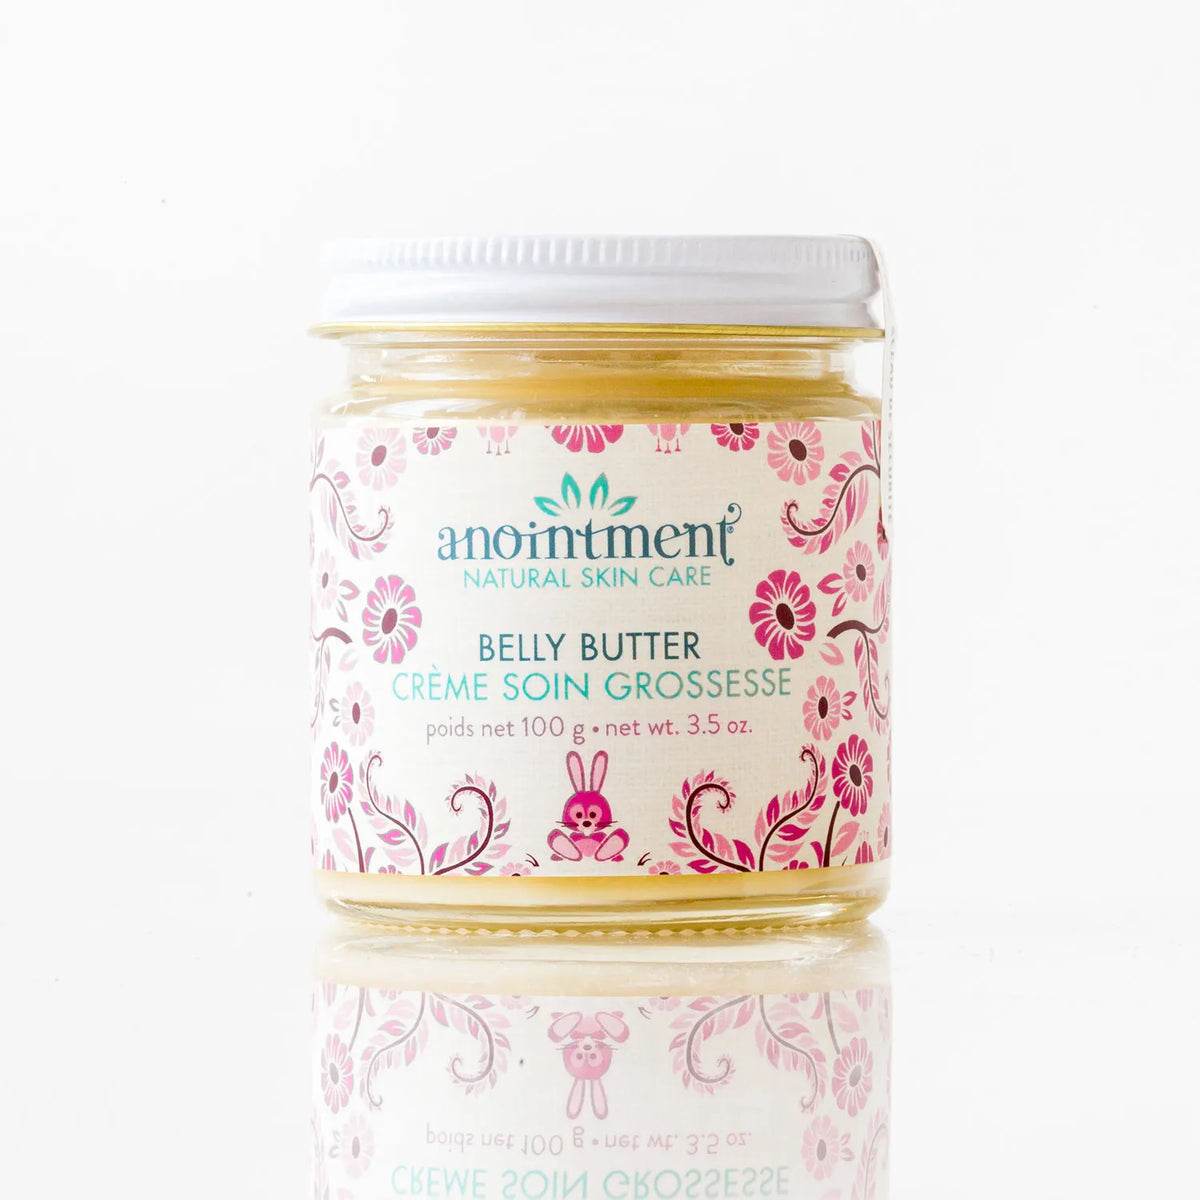 Anointment - Belly Butter